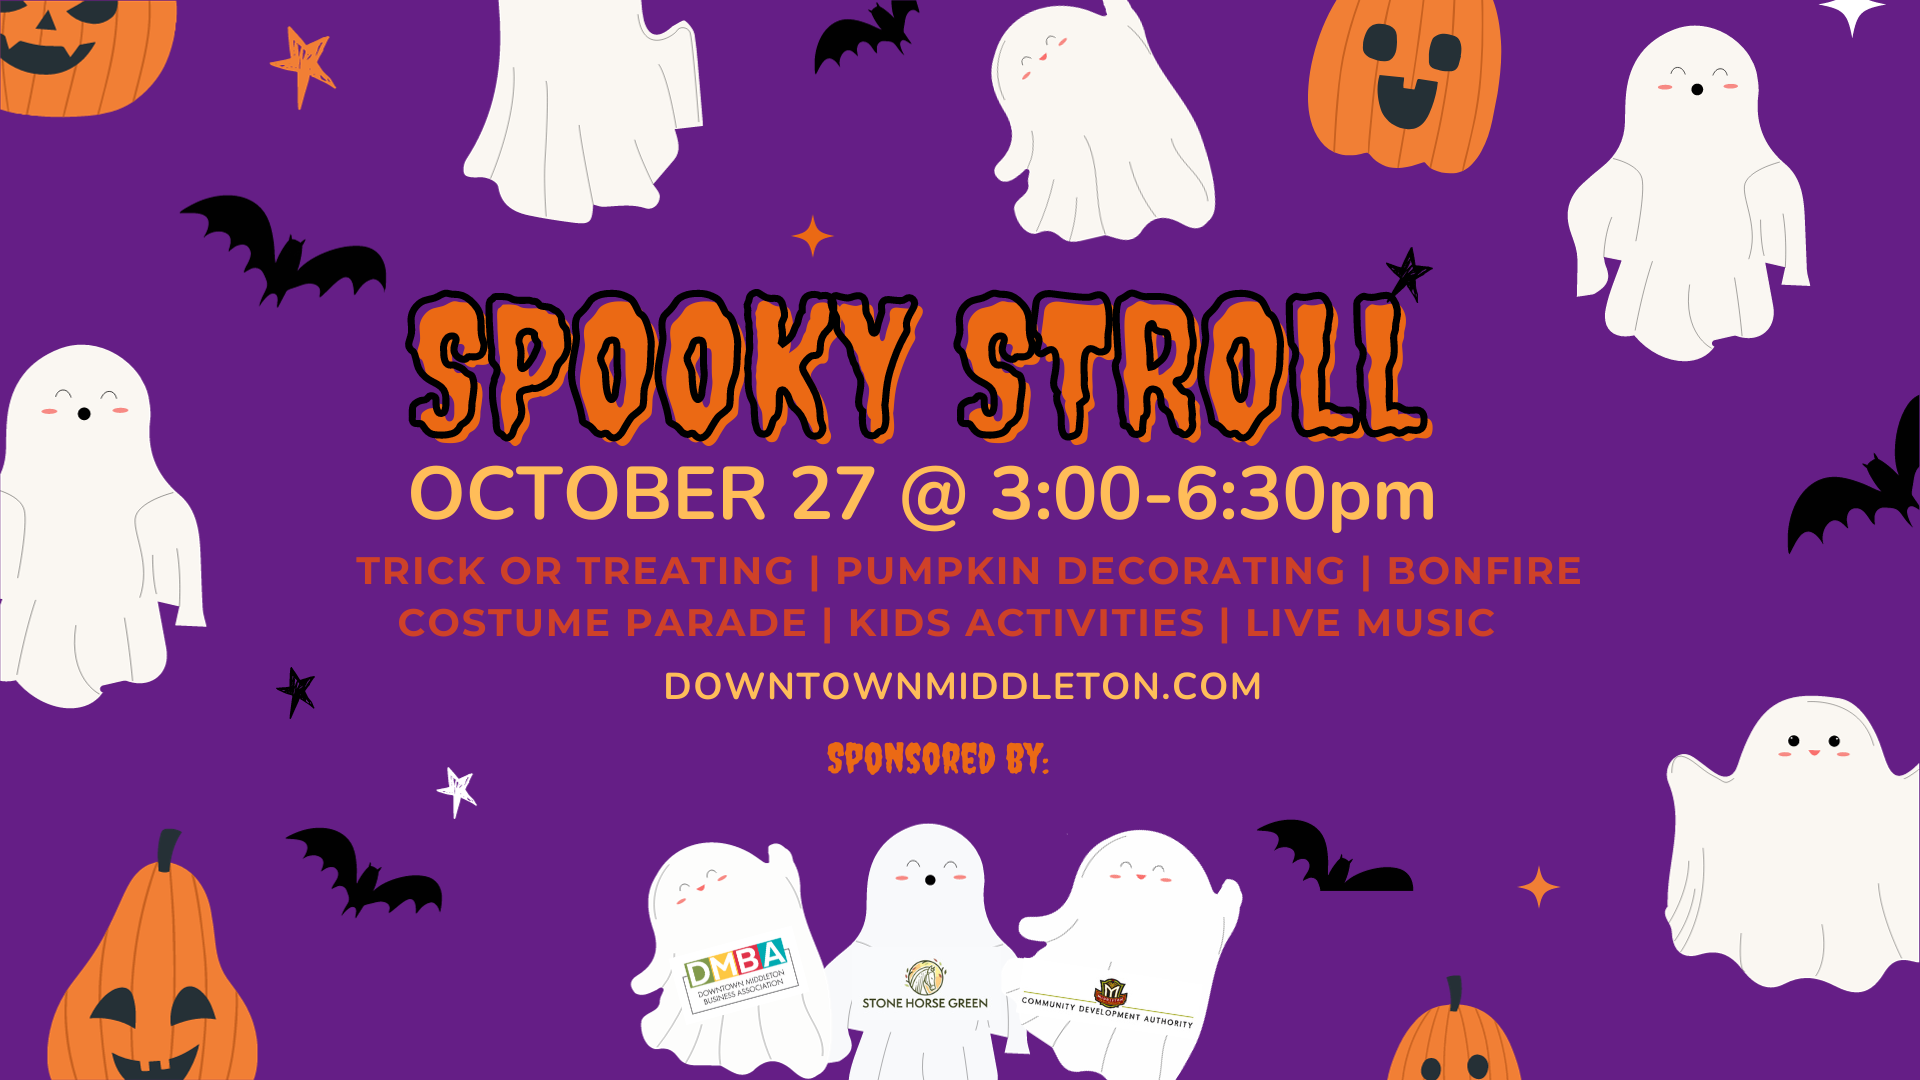 A flyer for spooky stroll.